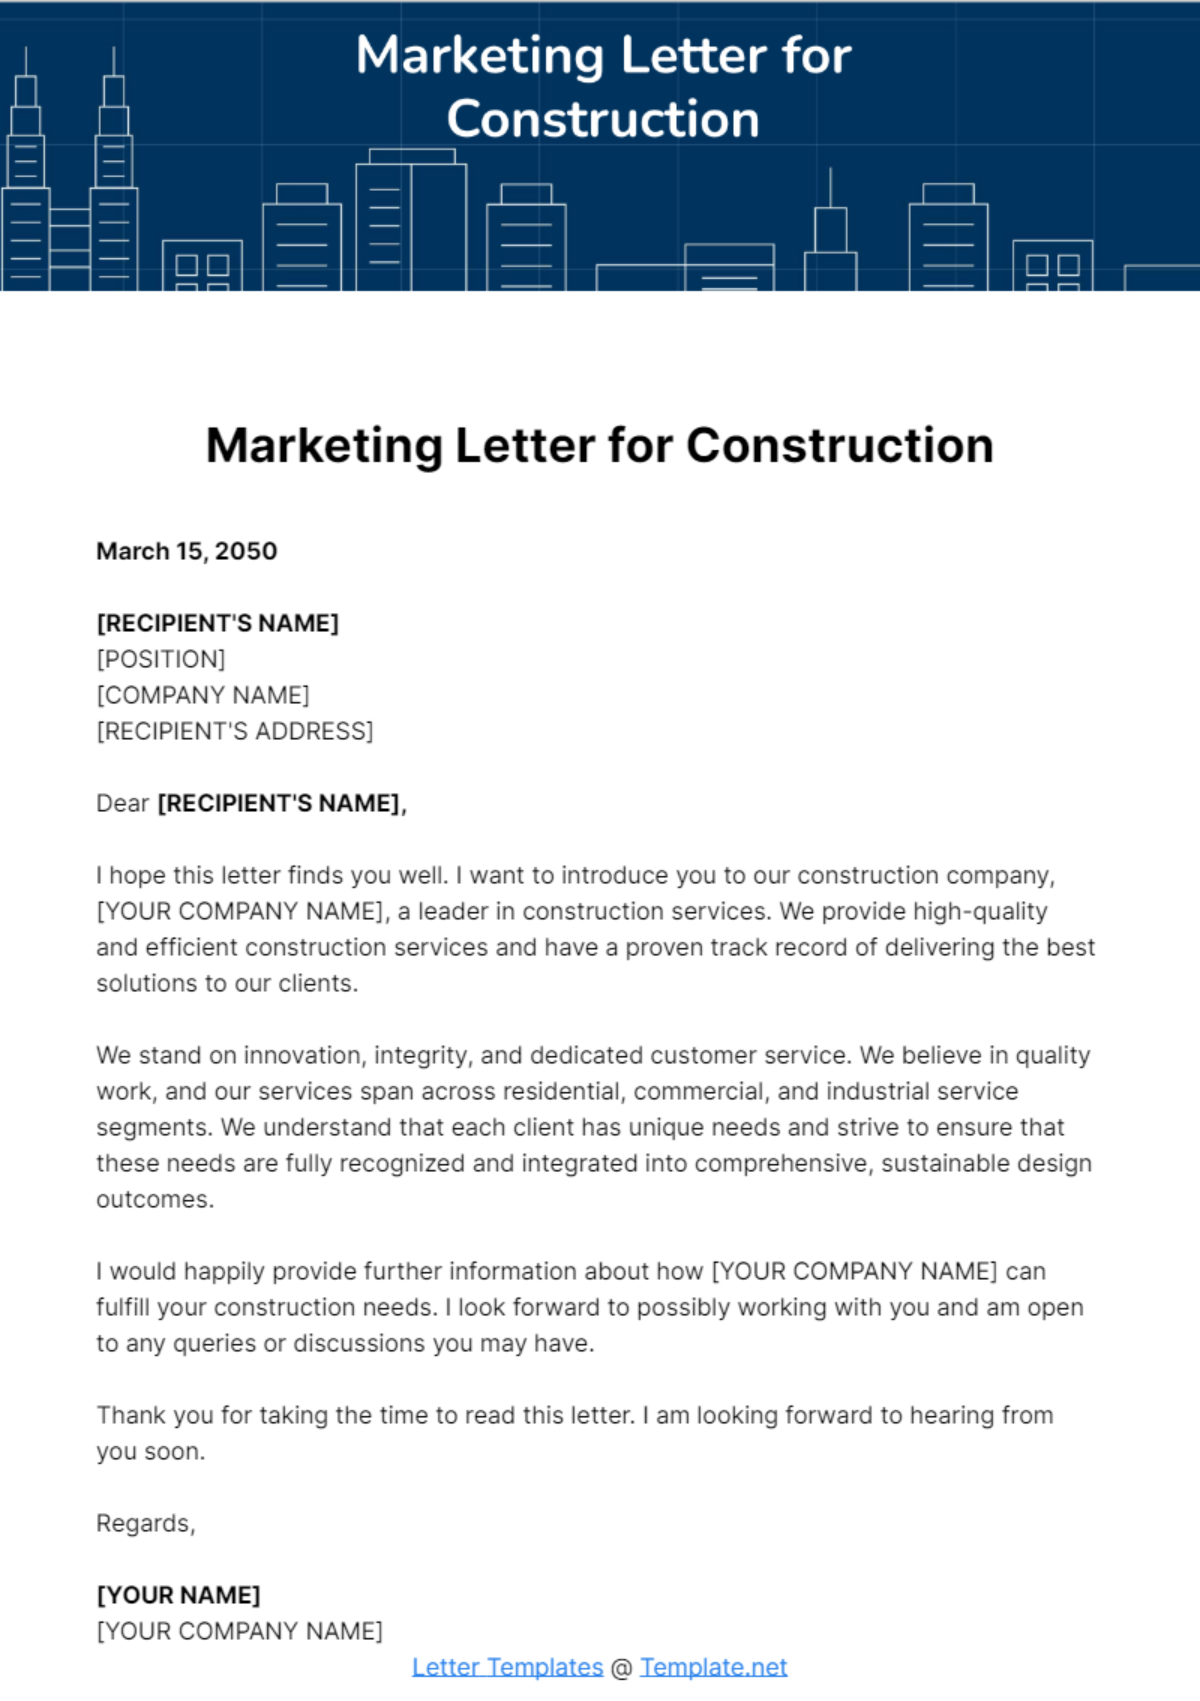 Marketing Letter for Construction Template